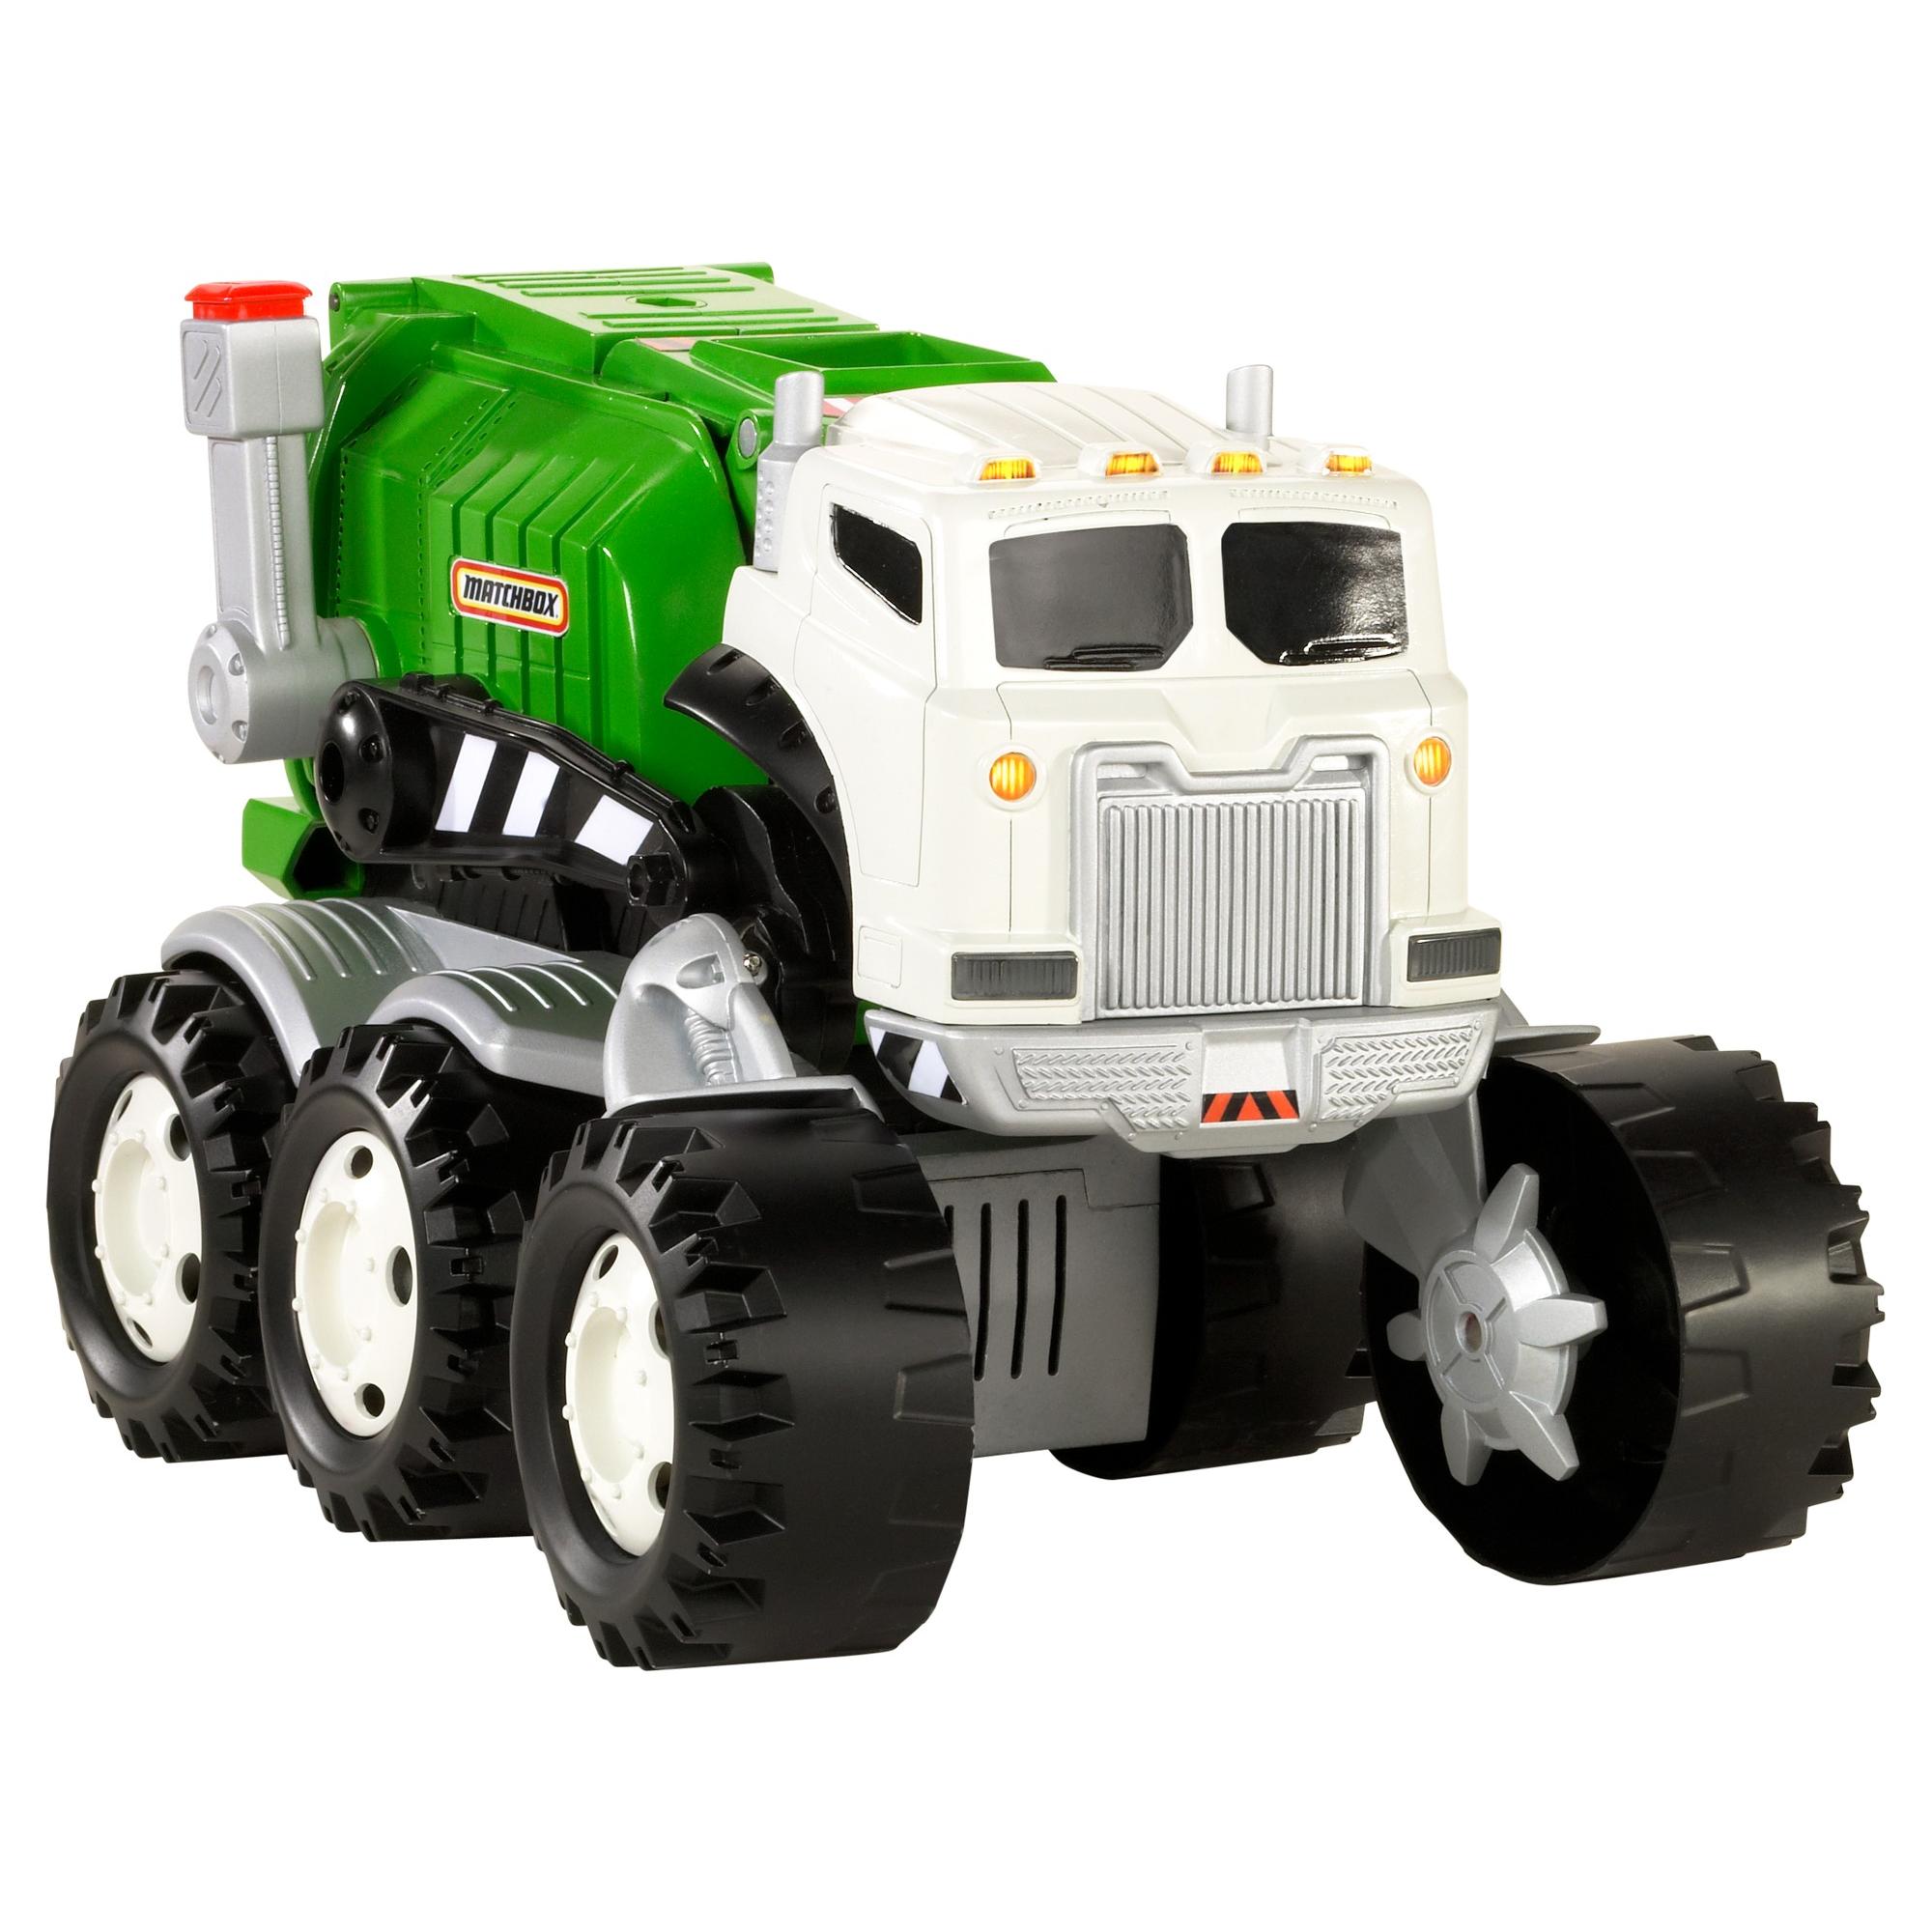 HOT!! Matchbox Stinky the Garbage Truck Only $19.97! (Reg $54.84) Great For Little Ones